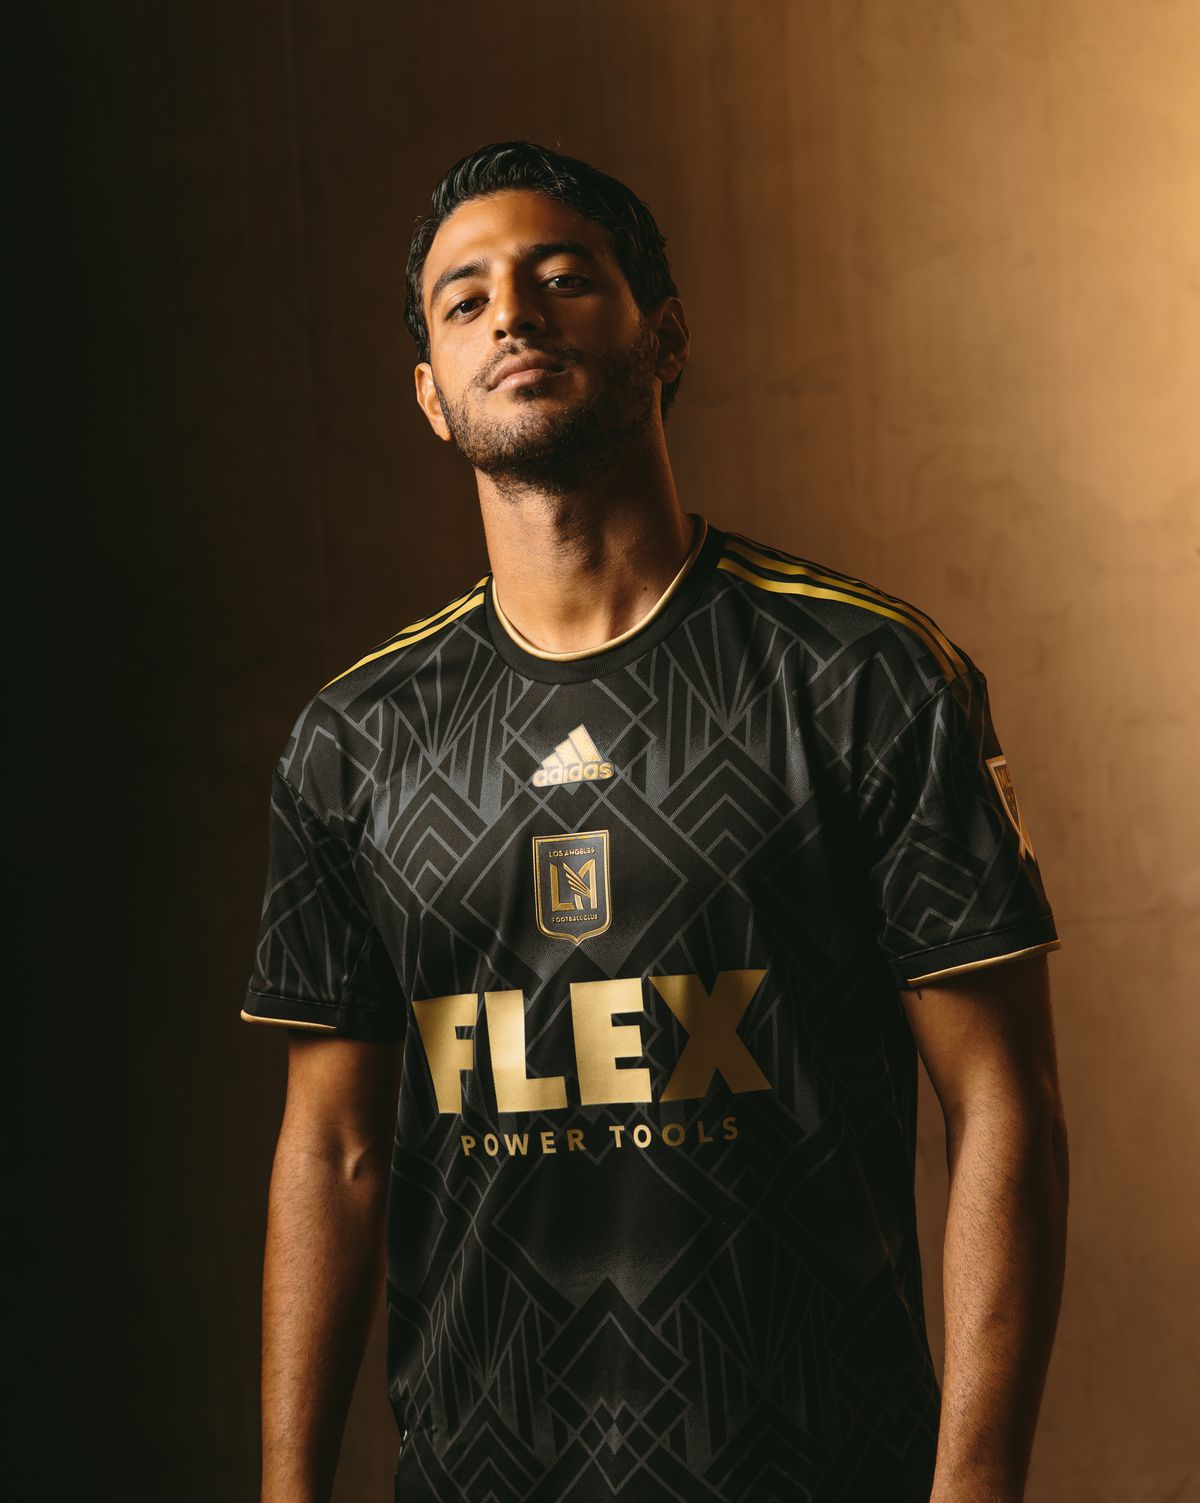 Los Angeles Fc Schedule 2022 Lafc Celebrate 5 Years Strong With 2022 Home Kit - Angels On Parade